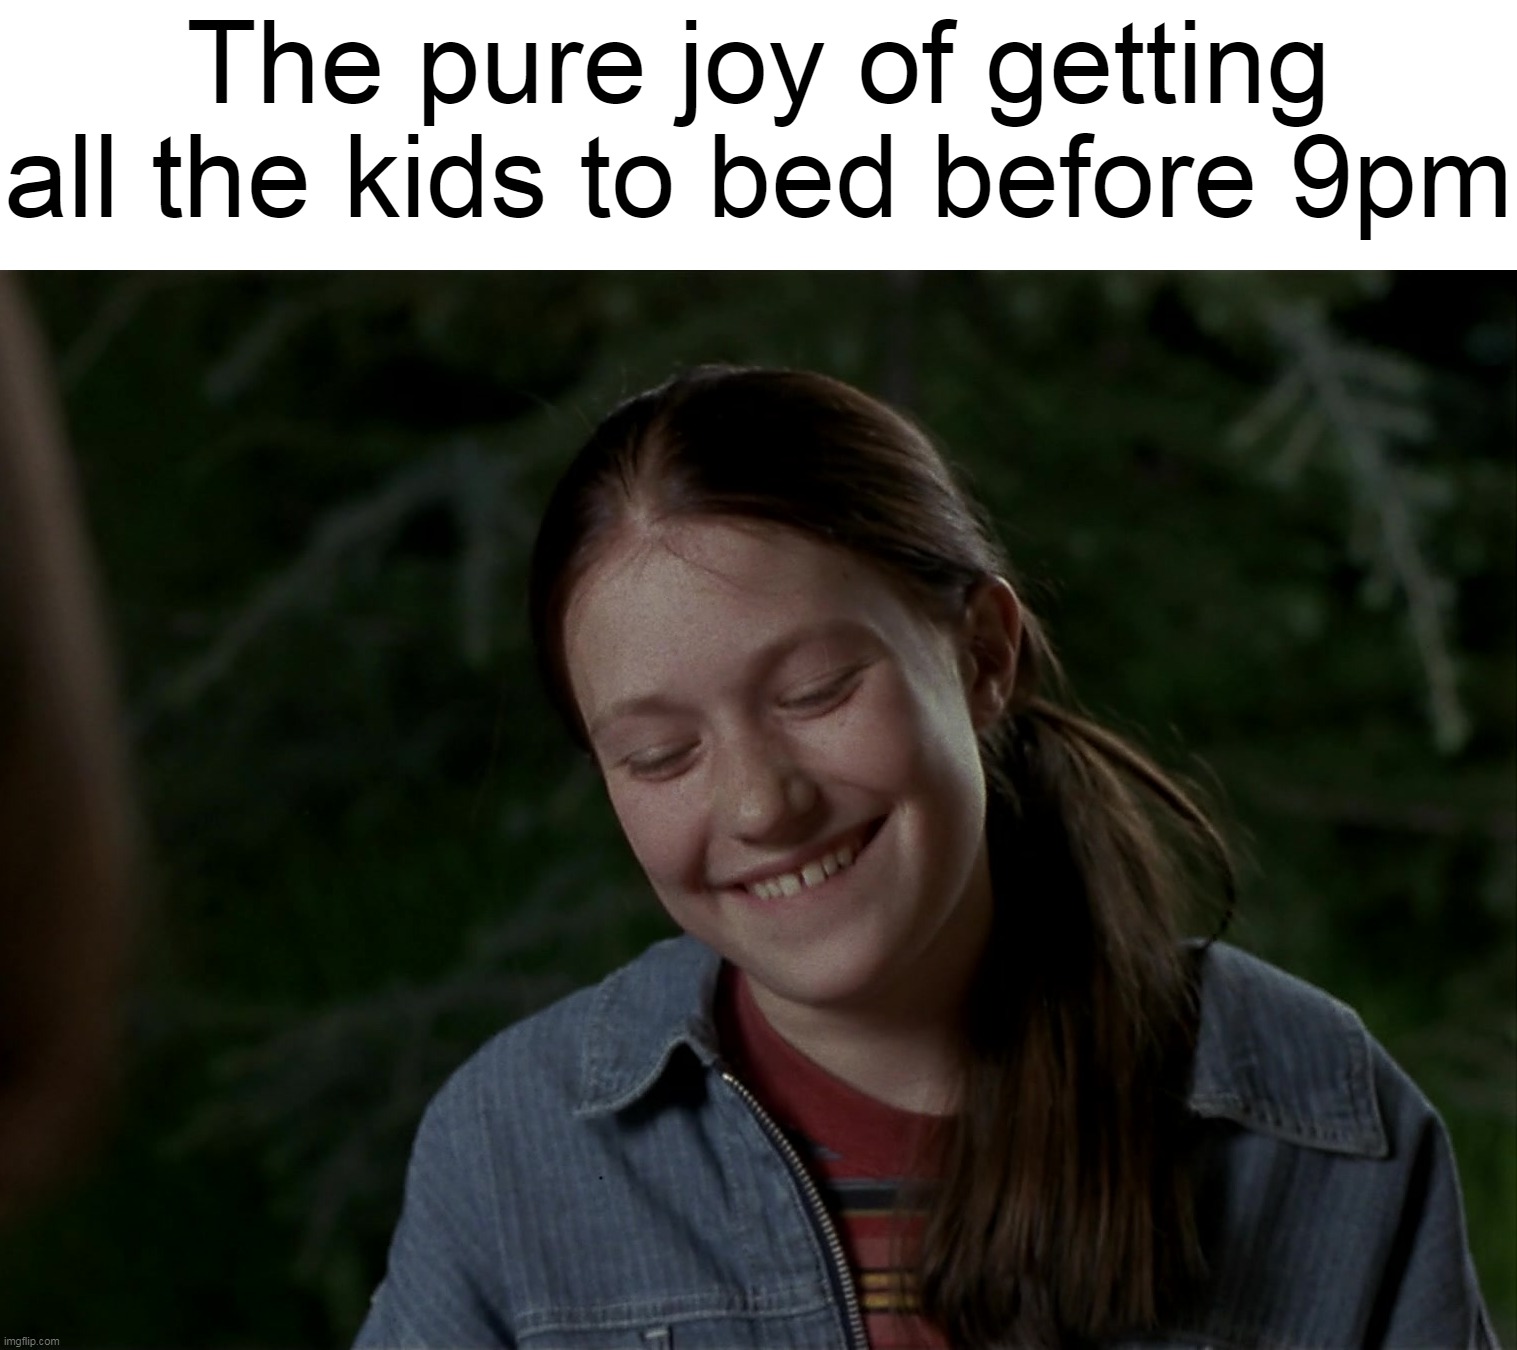 Time for Peace and Quiet | The pure joy of getting all the kids to bed before 9pm | image tagged in meme,memes,humor,parents | made w/ Imgflip meme maker